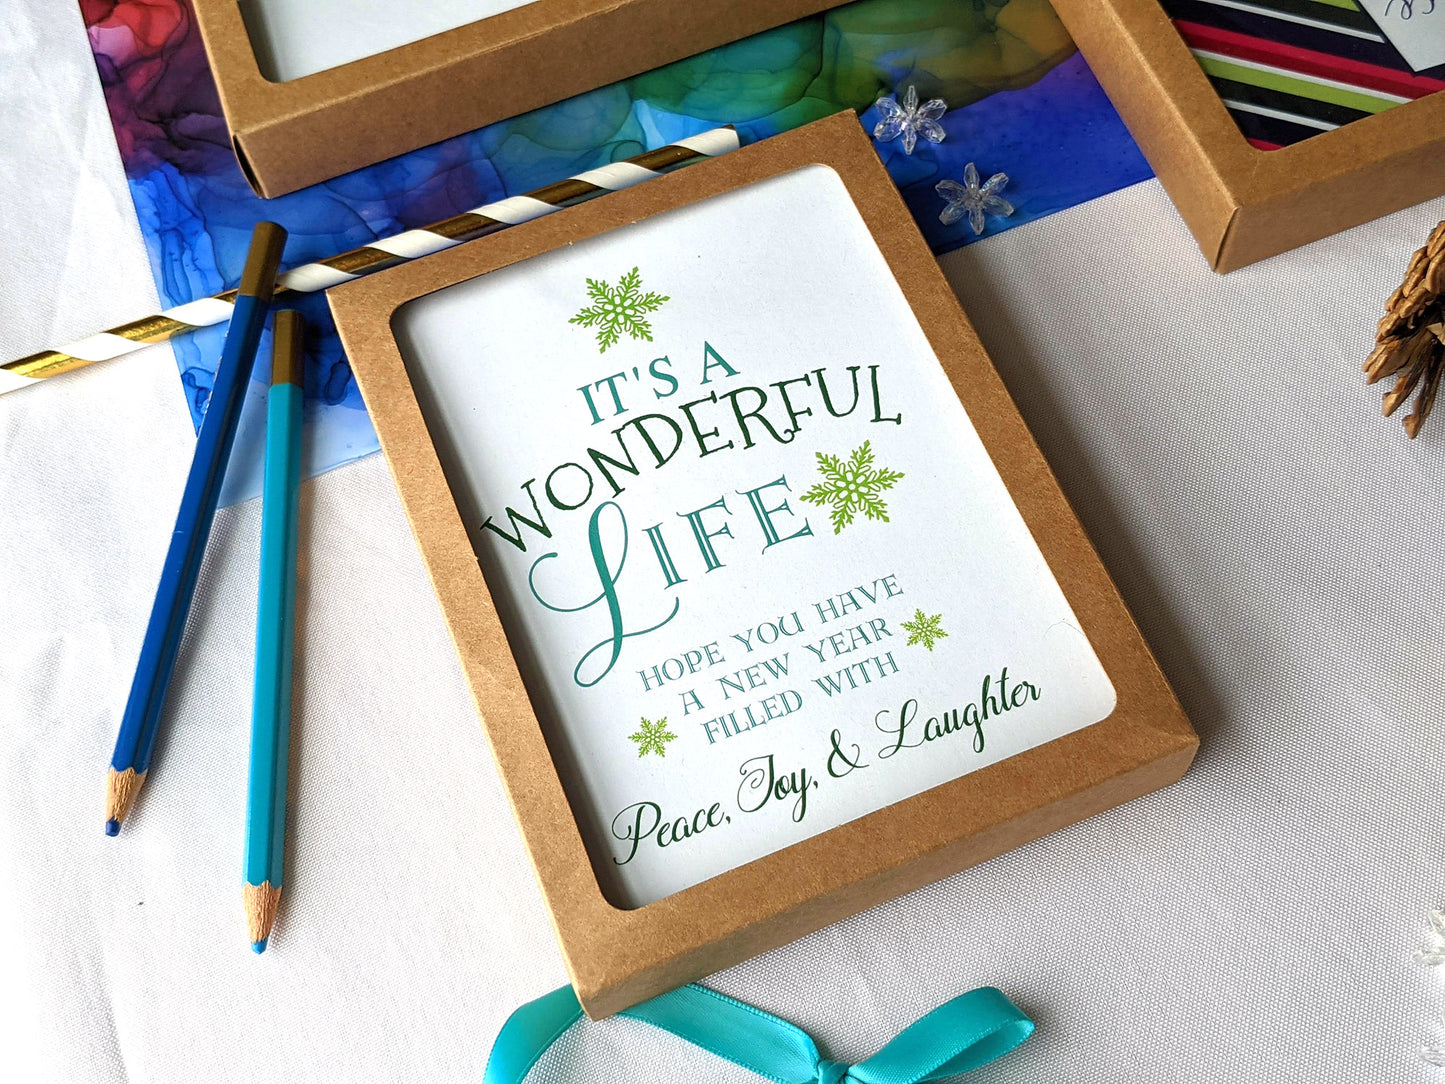 merry christmas greetings for friends | it's a wonderful life holiday card